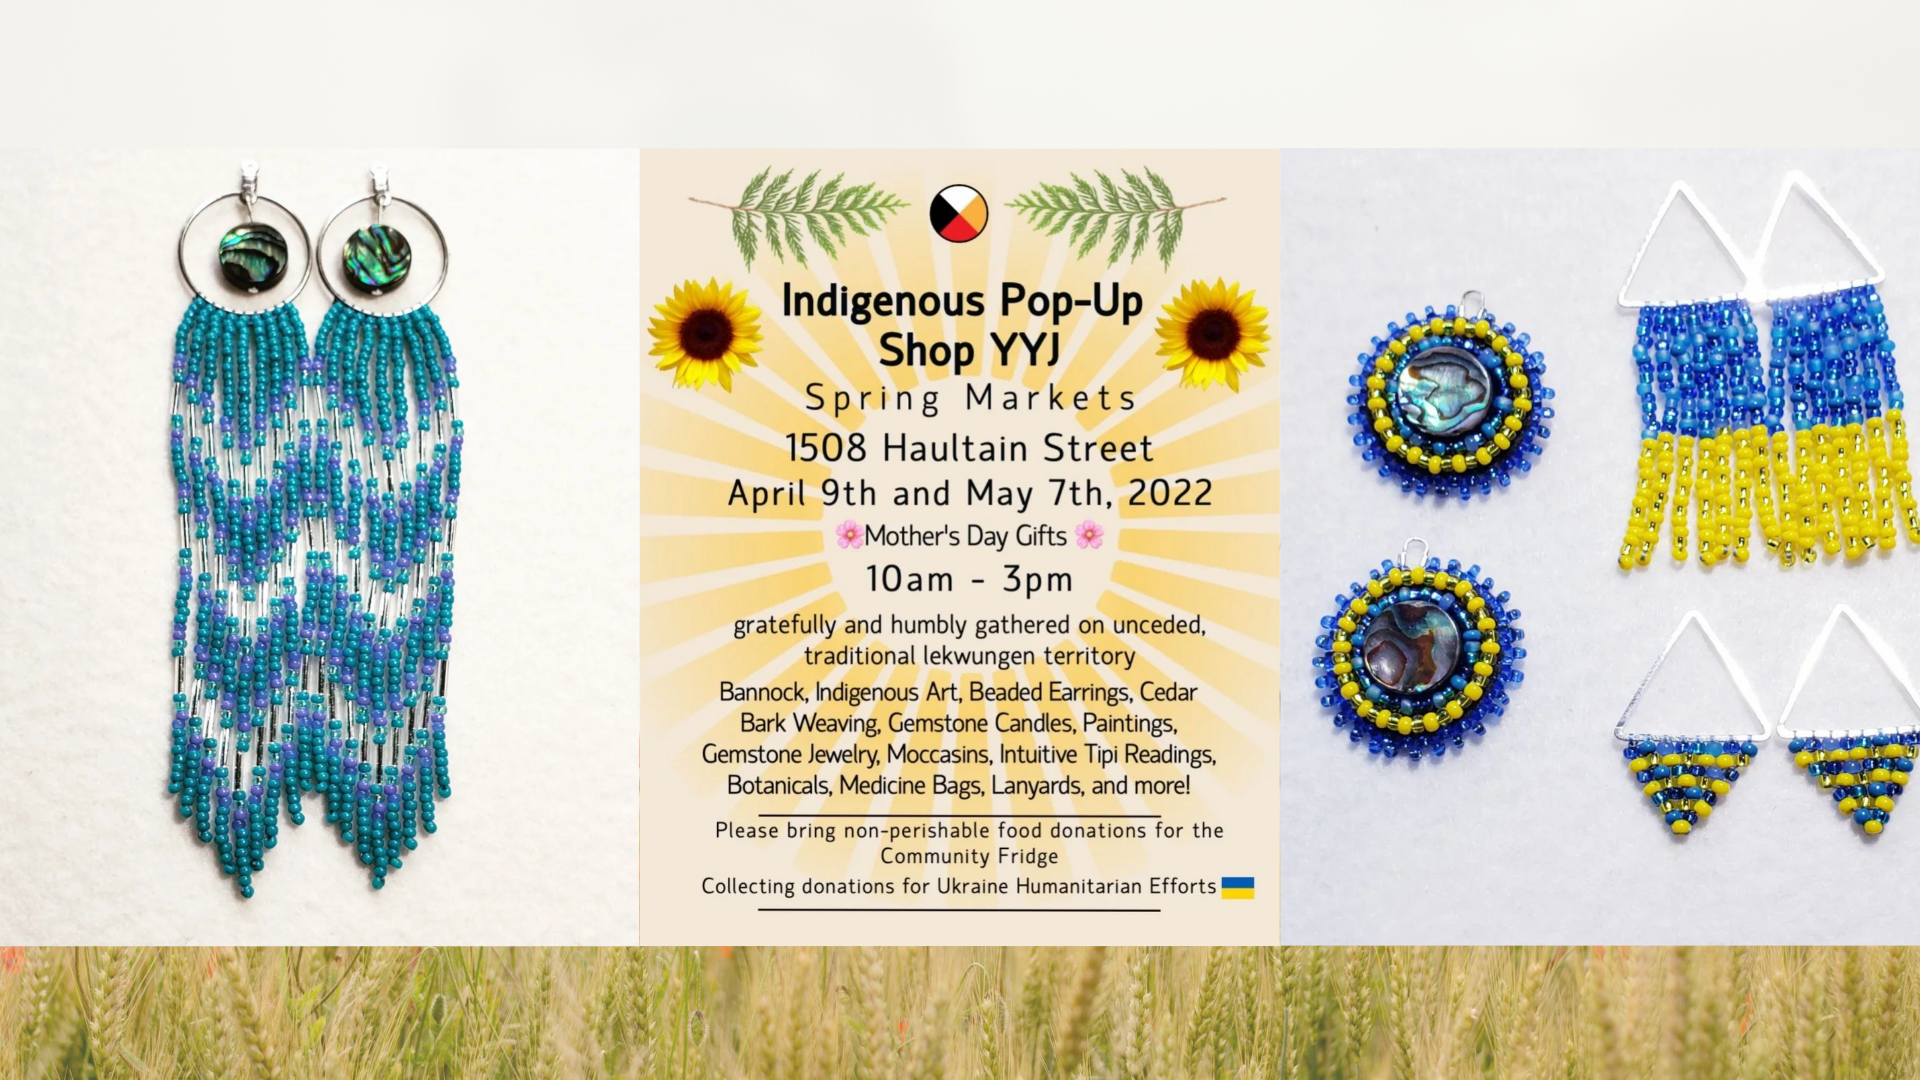 Beadwork and event flyer, photos sourced from @indigenouspopupshopyyj on Instagram and by Jen Mucciolo.